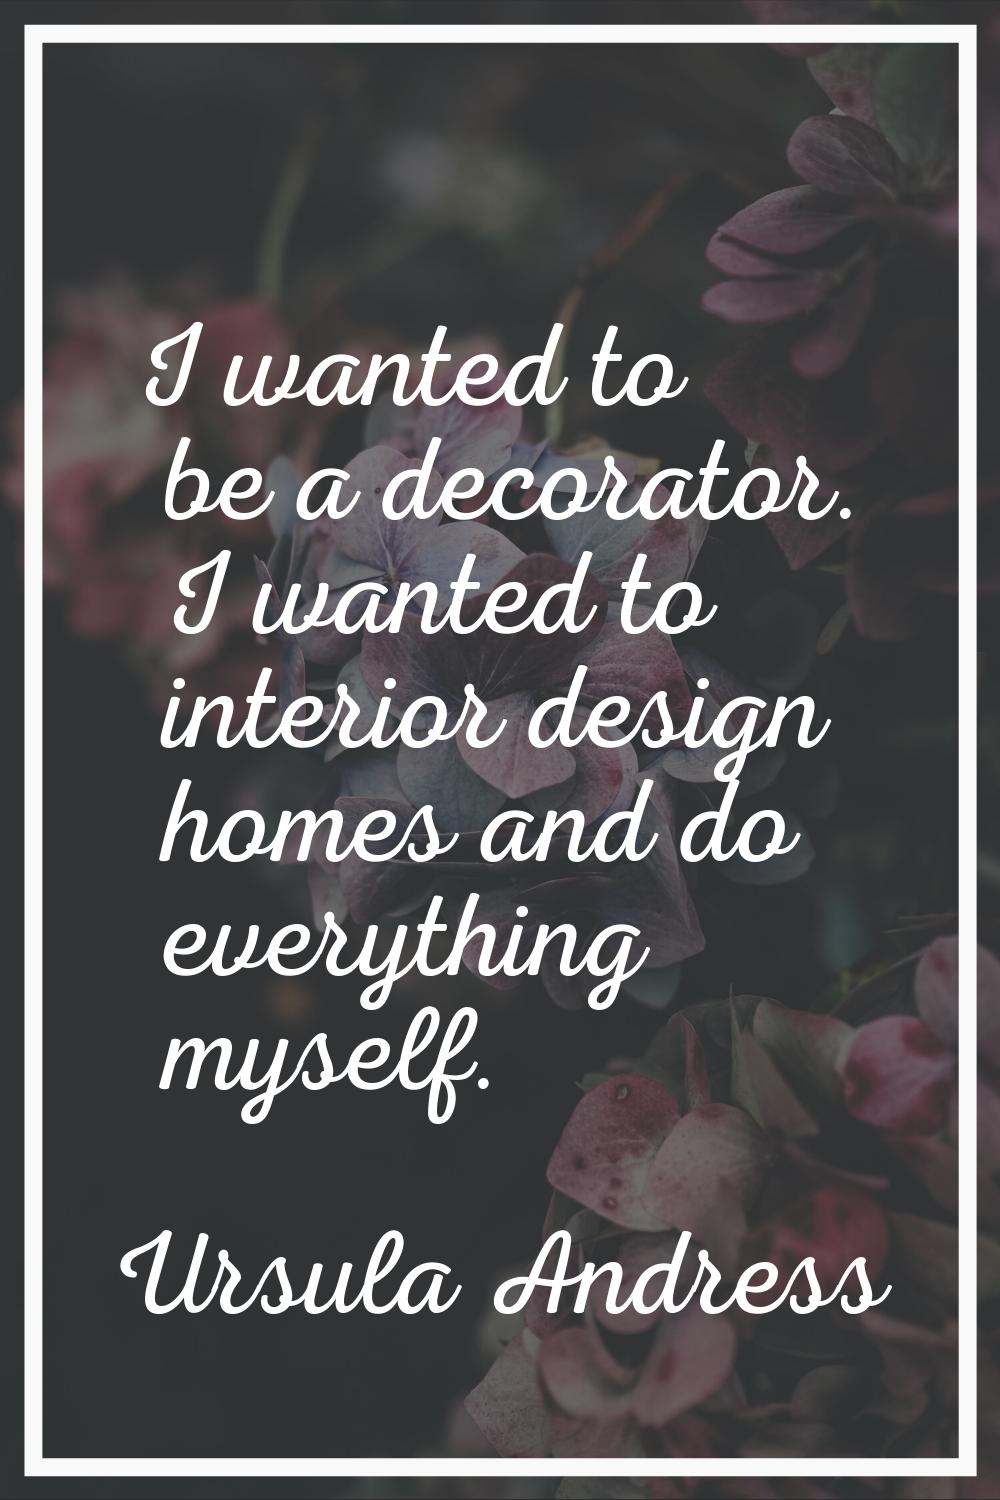 I wanted to be a decorator. I wanted to interior design homes and do everything myself.